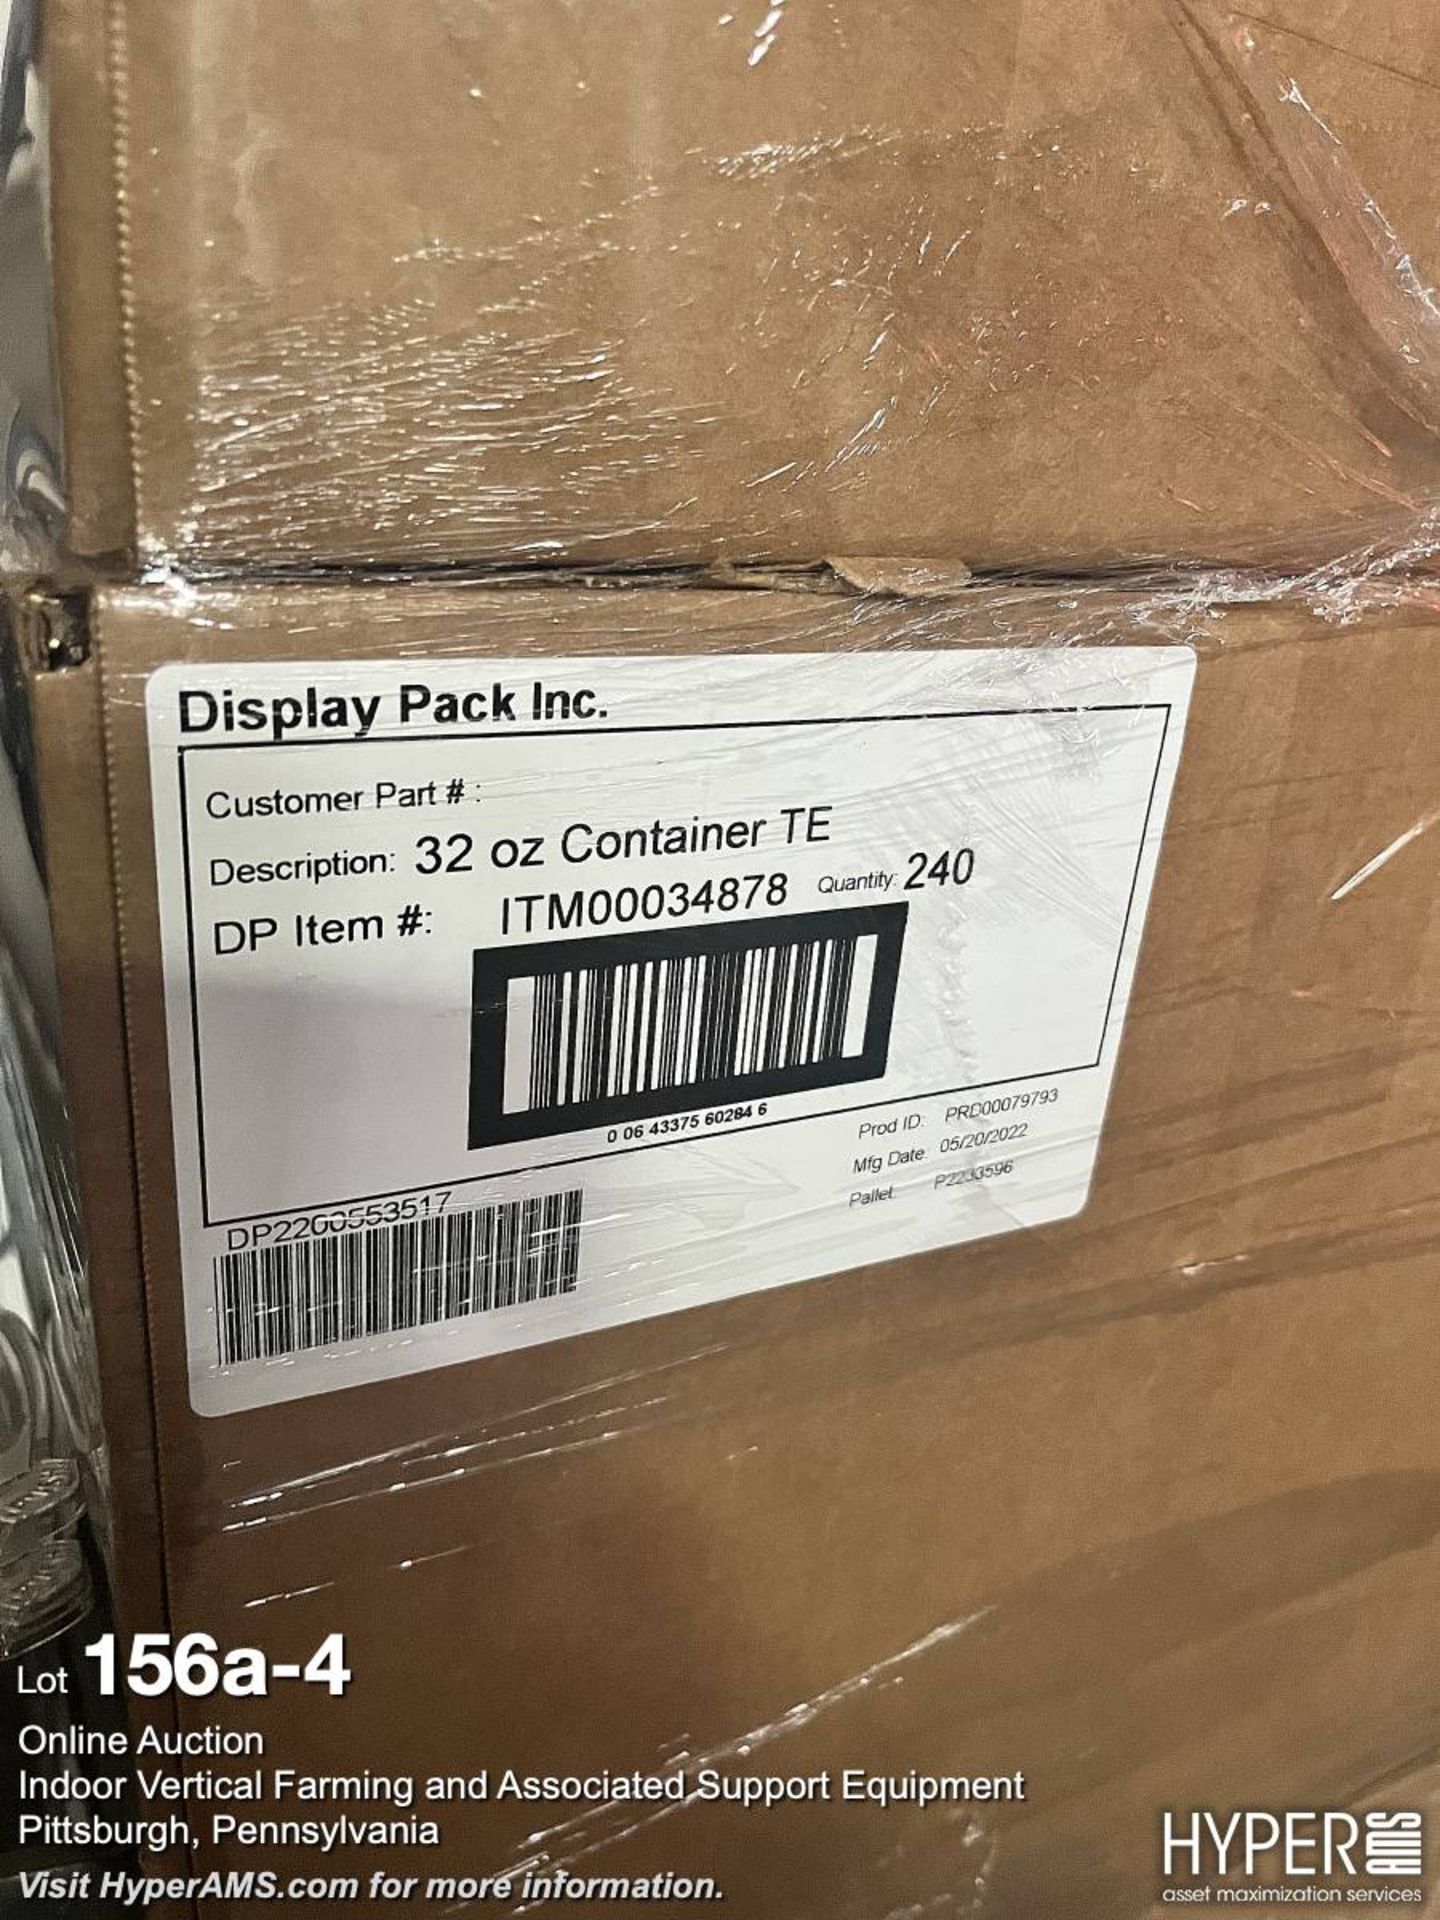 Large lot of display pack inventory - Image 4 of 5